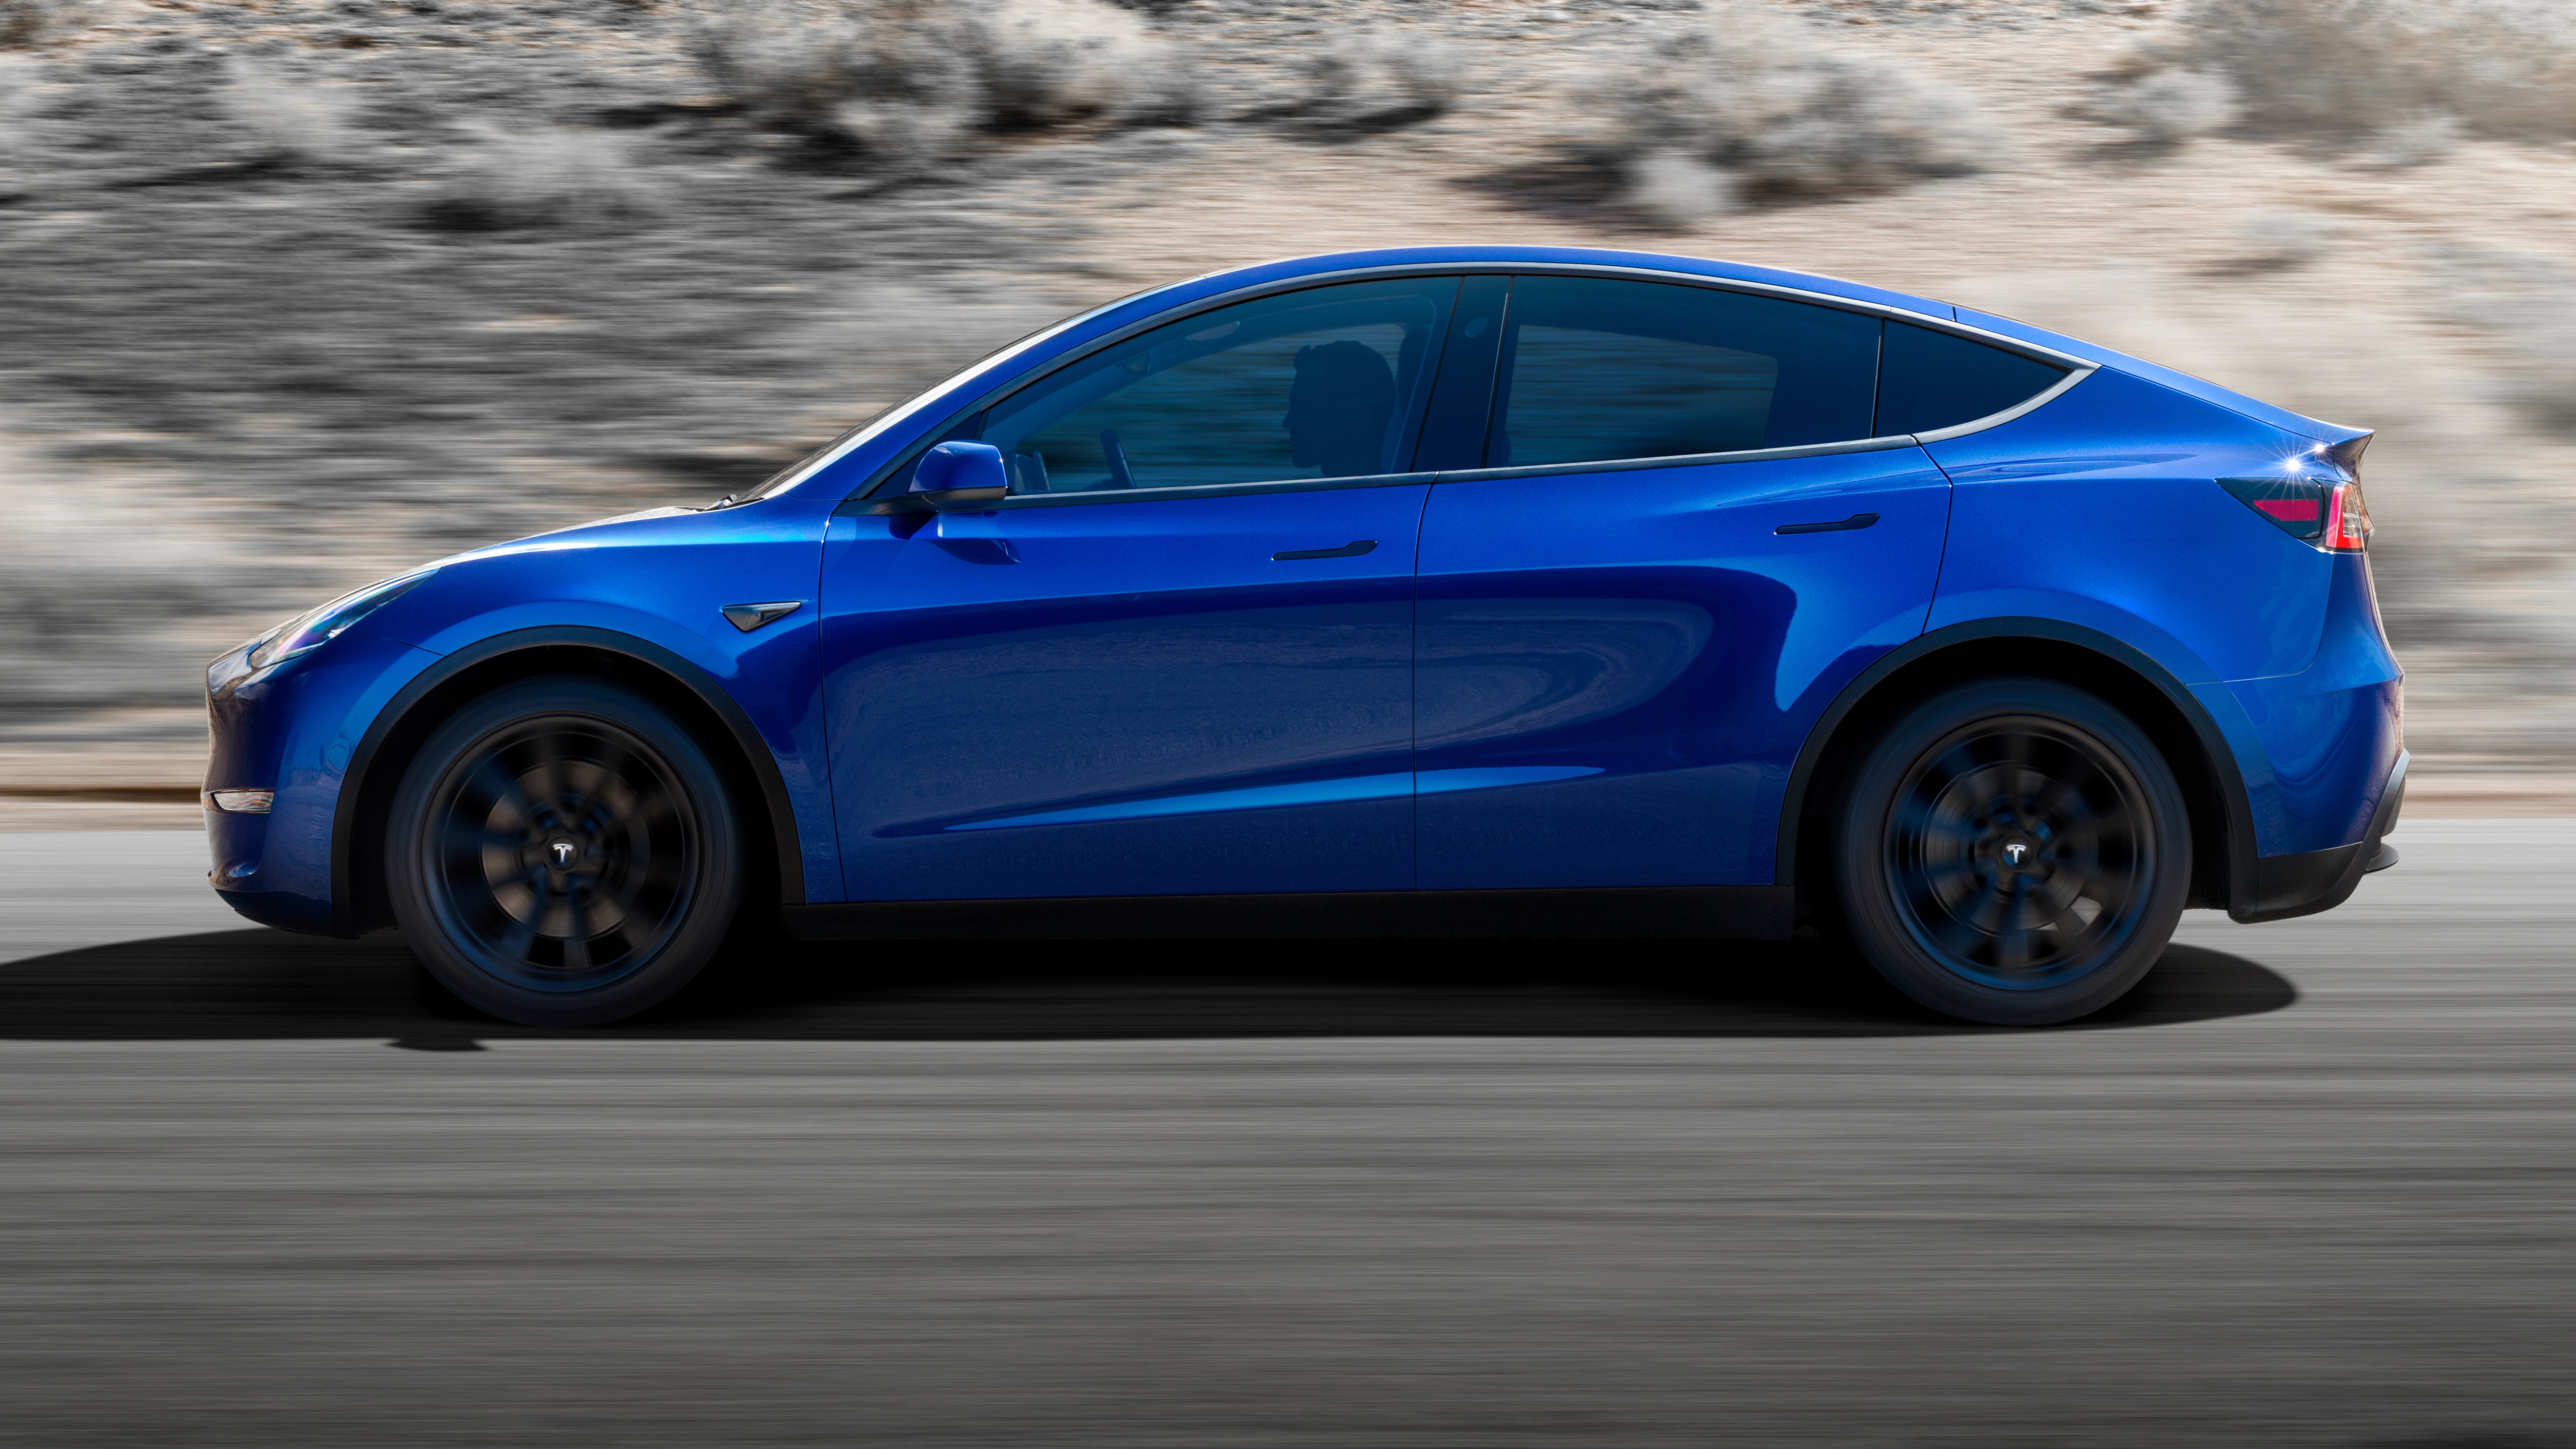 Tesla Model Y Crossover Suv Review Be Sustainable New 2024 Nissan Release